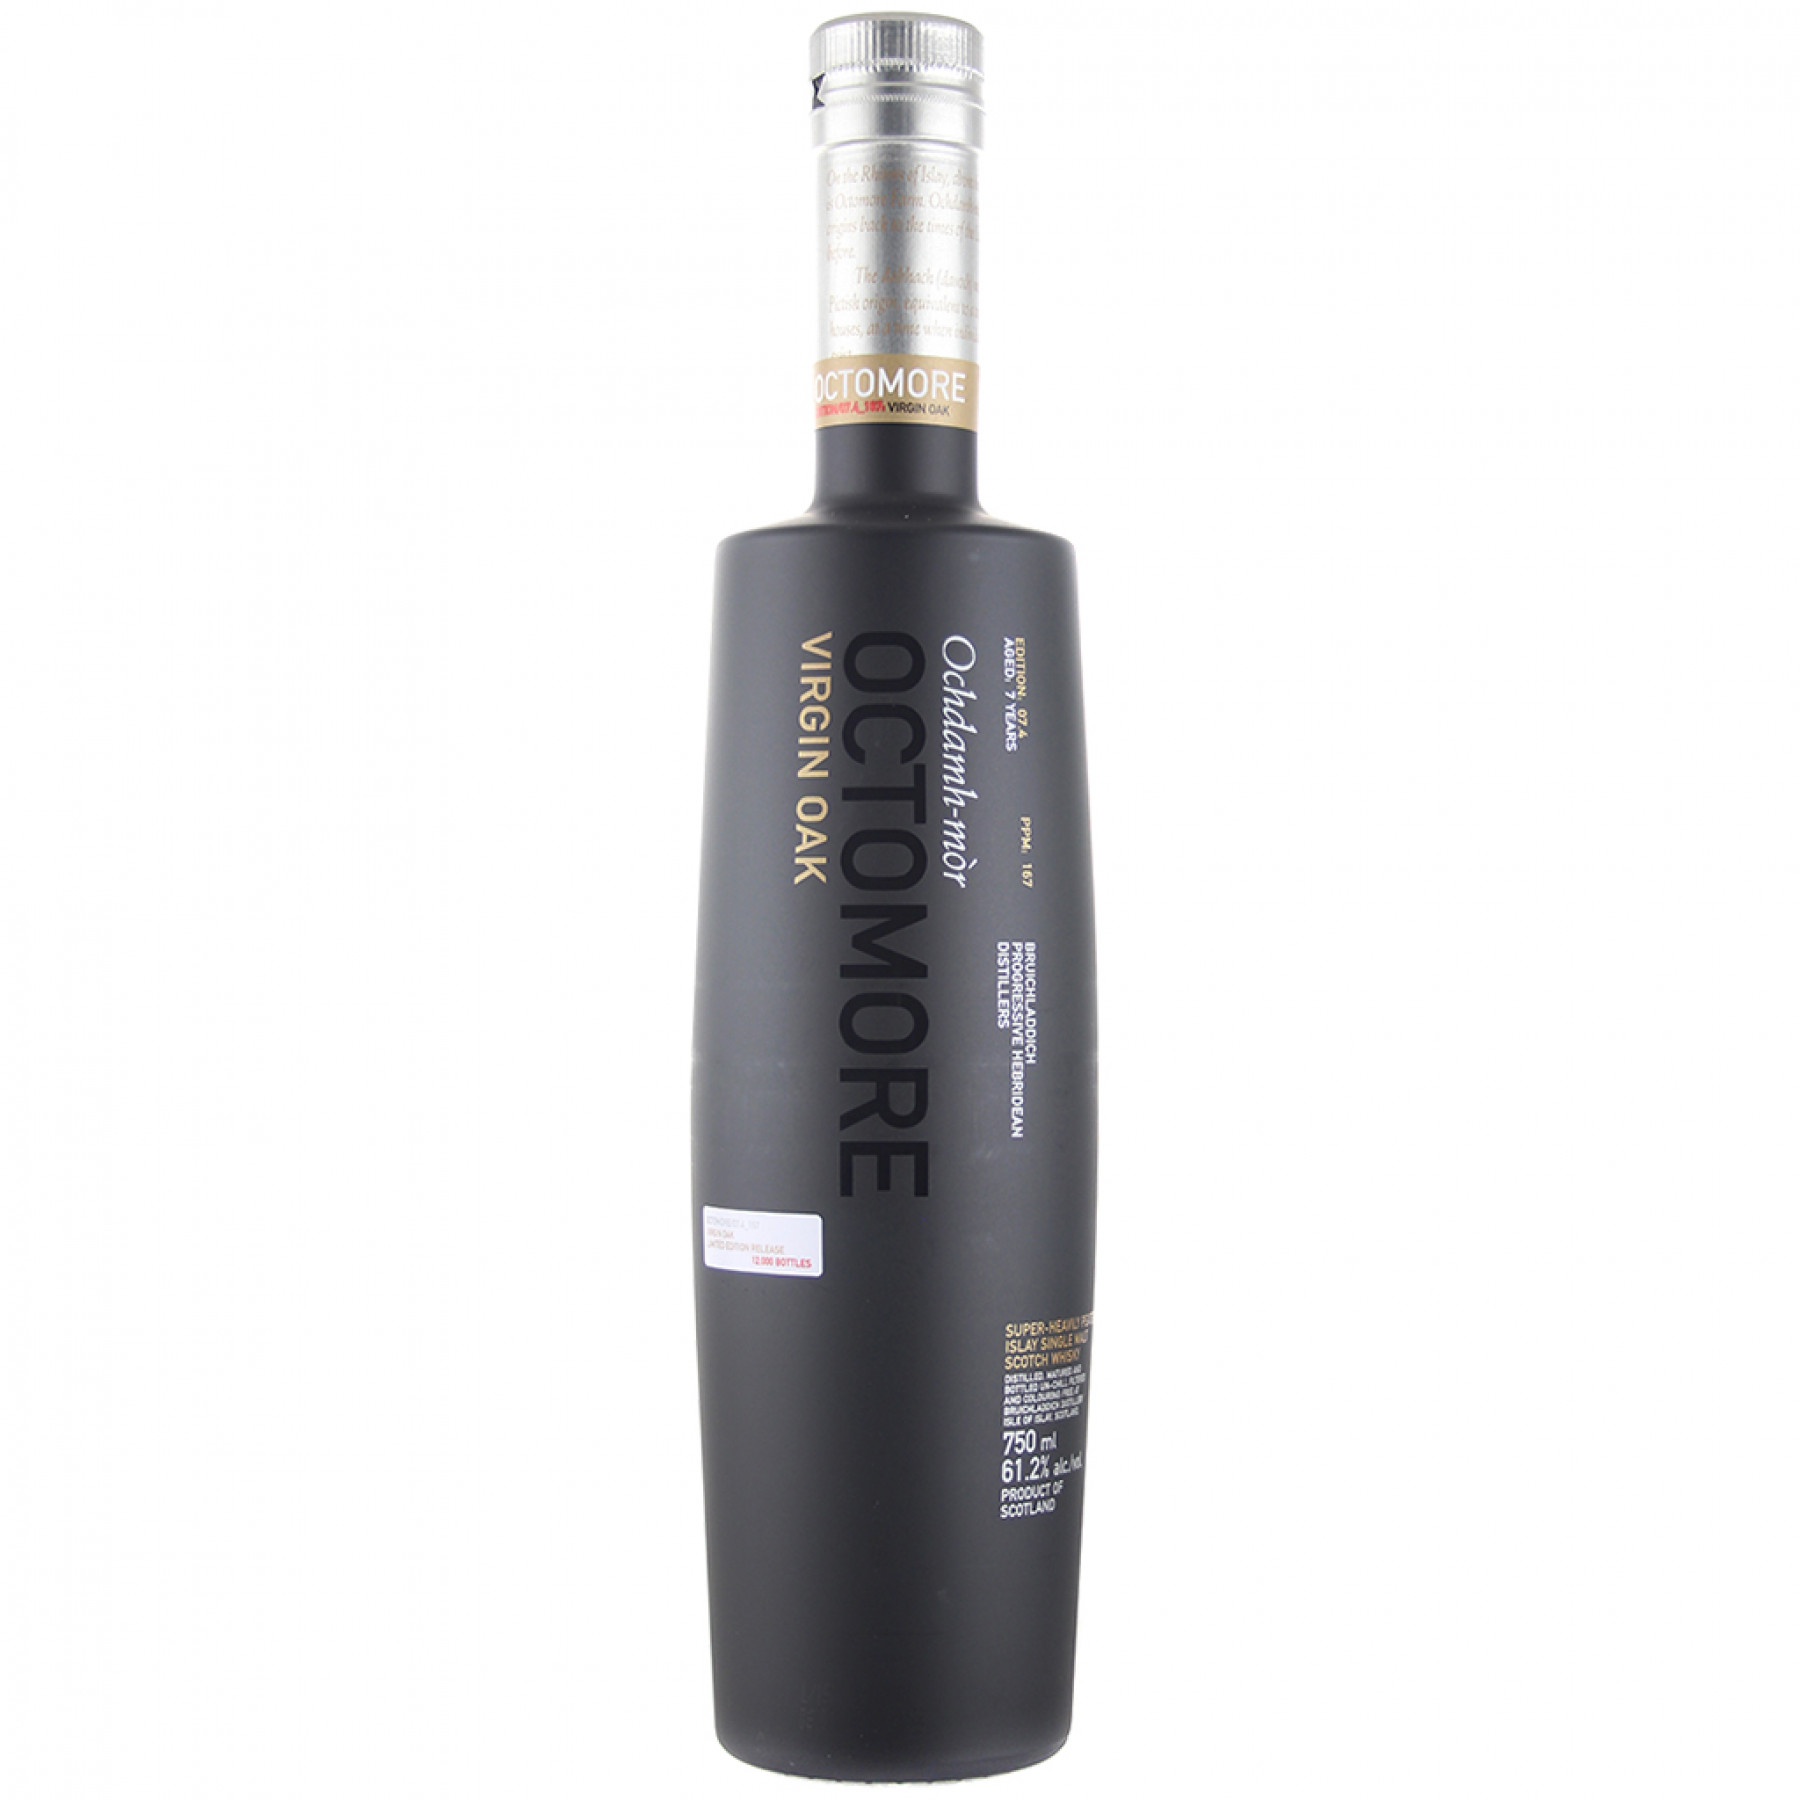 Bruichladdich Octomore 07.4 Virgin Oak Whisky Without Tin - 70cl 61.2%